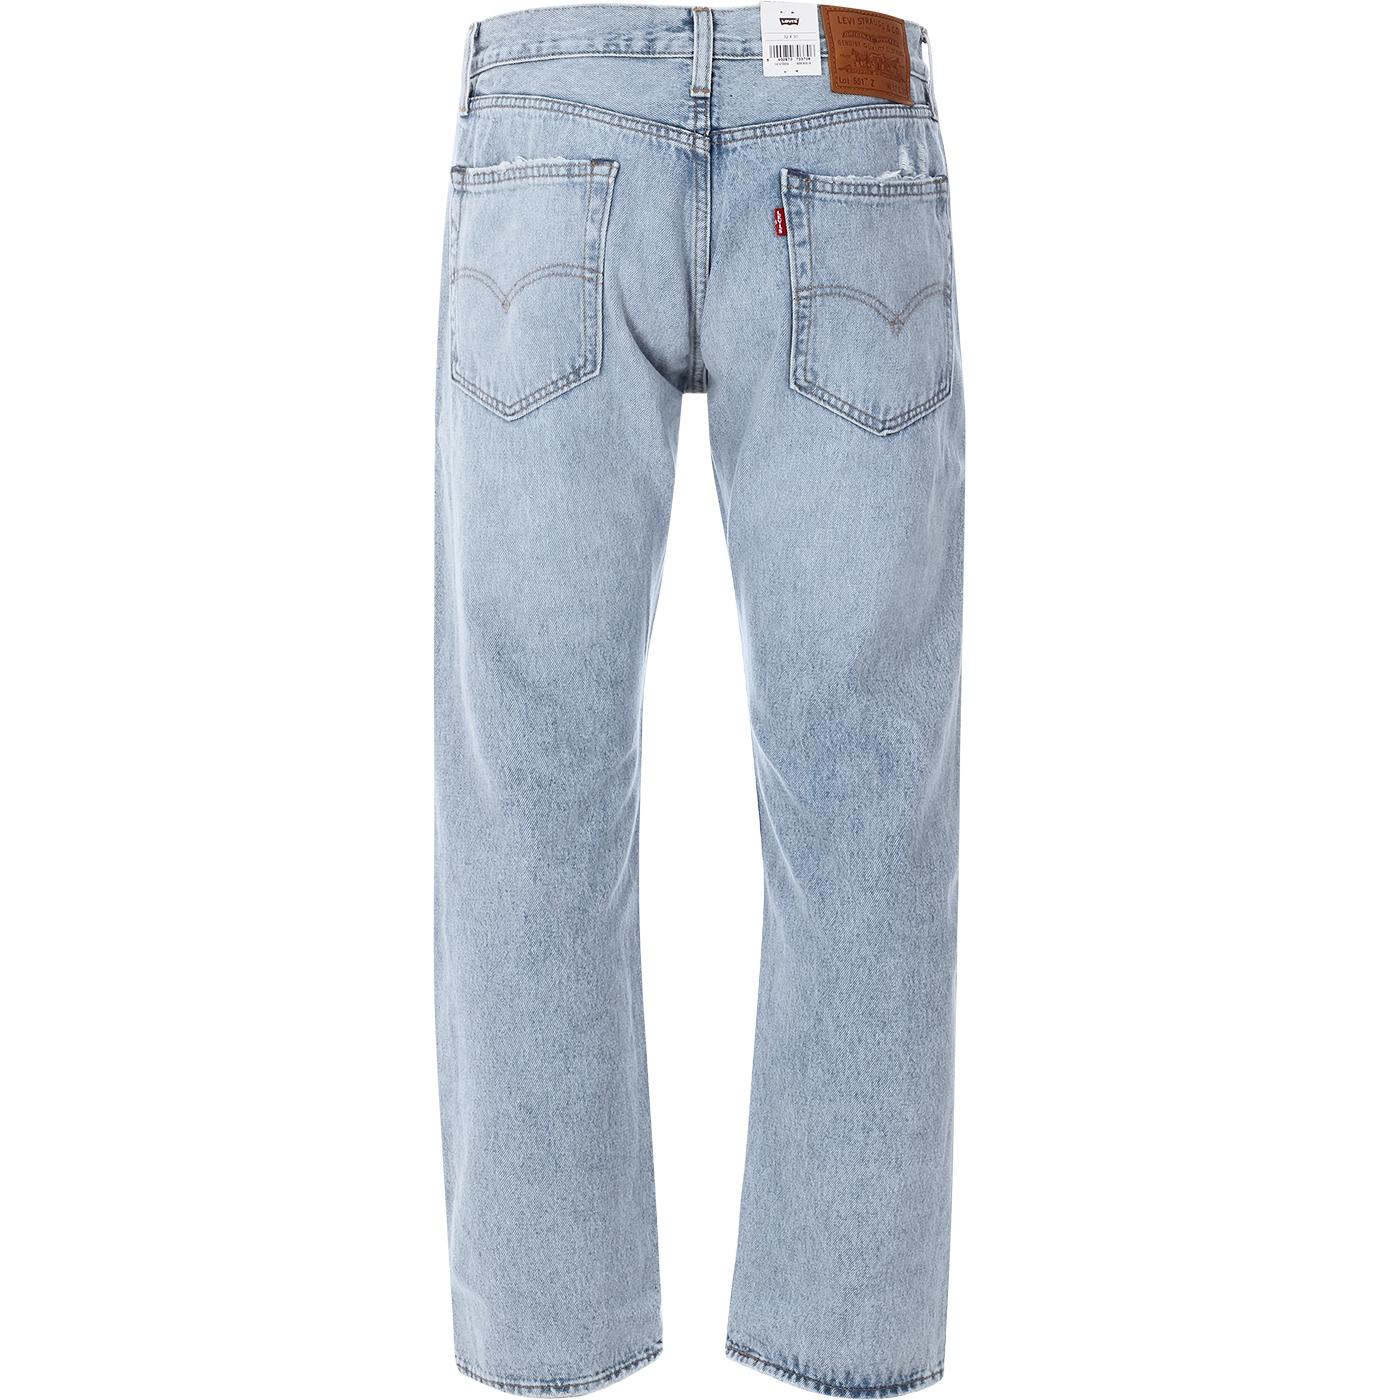 LEVI'S 551Z Authentic Straight Denim Jeans in Beyond Contact